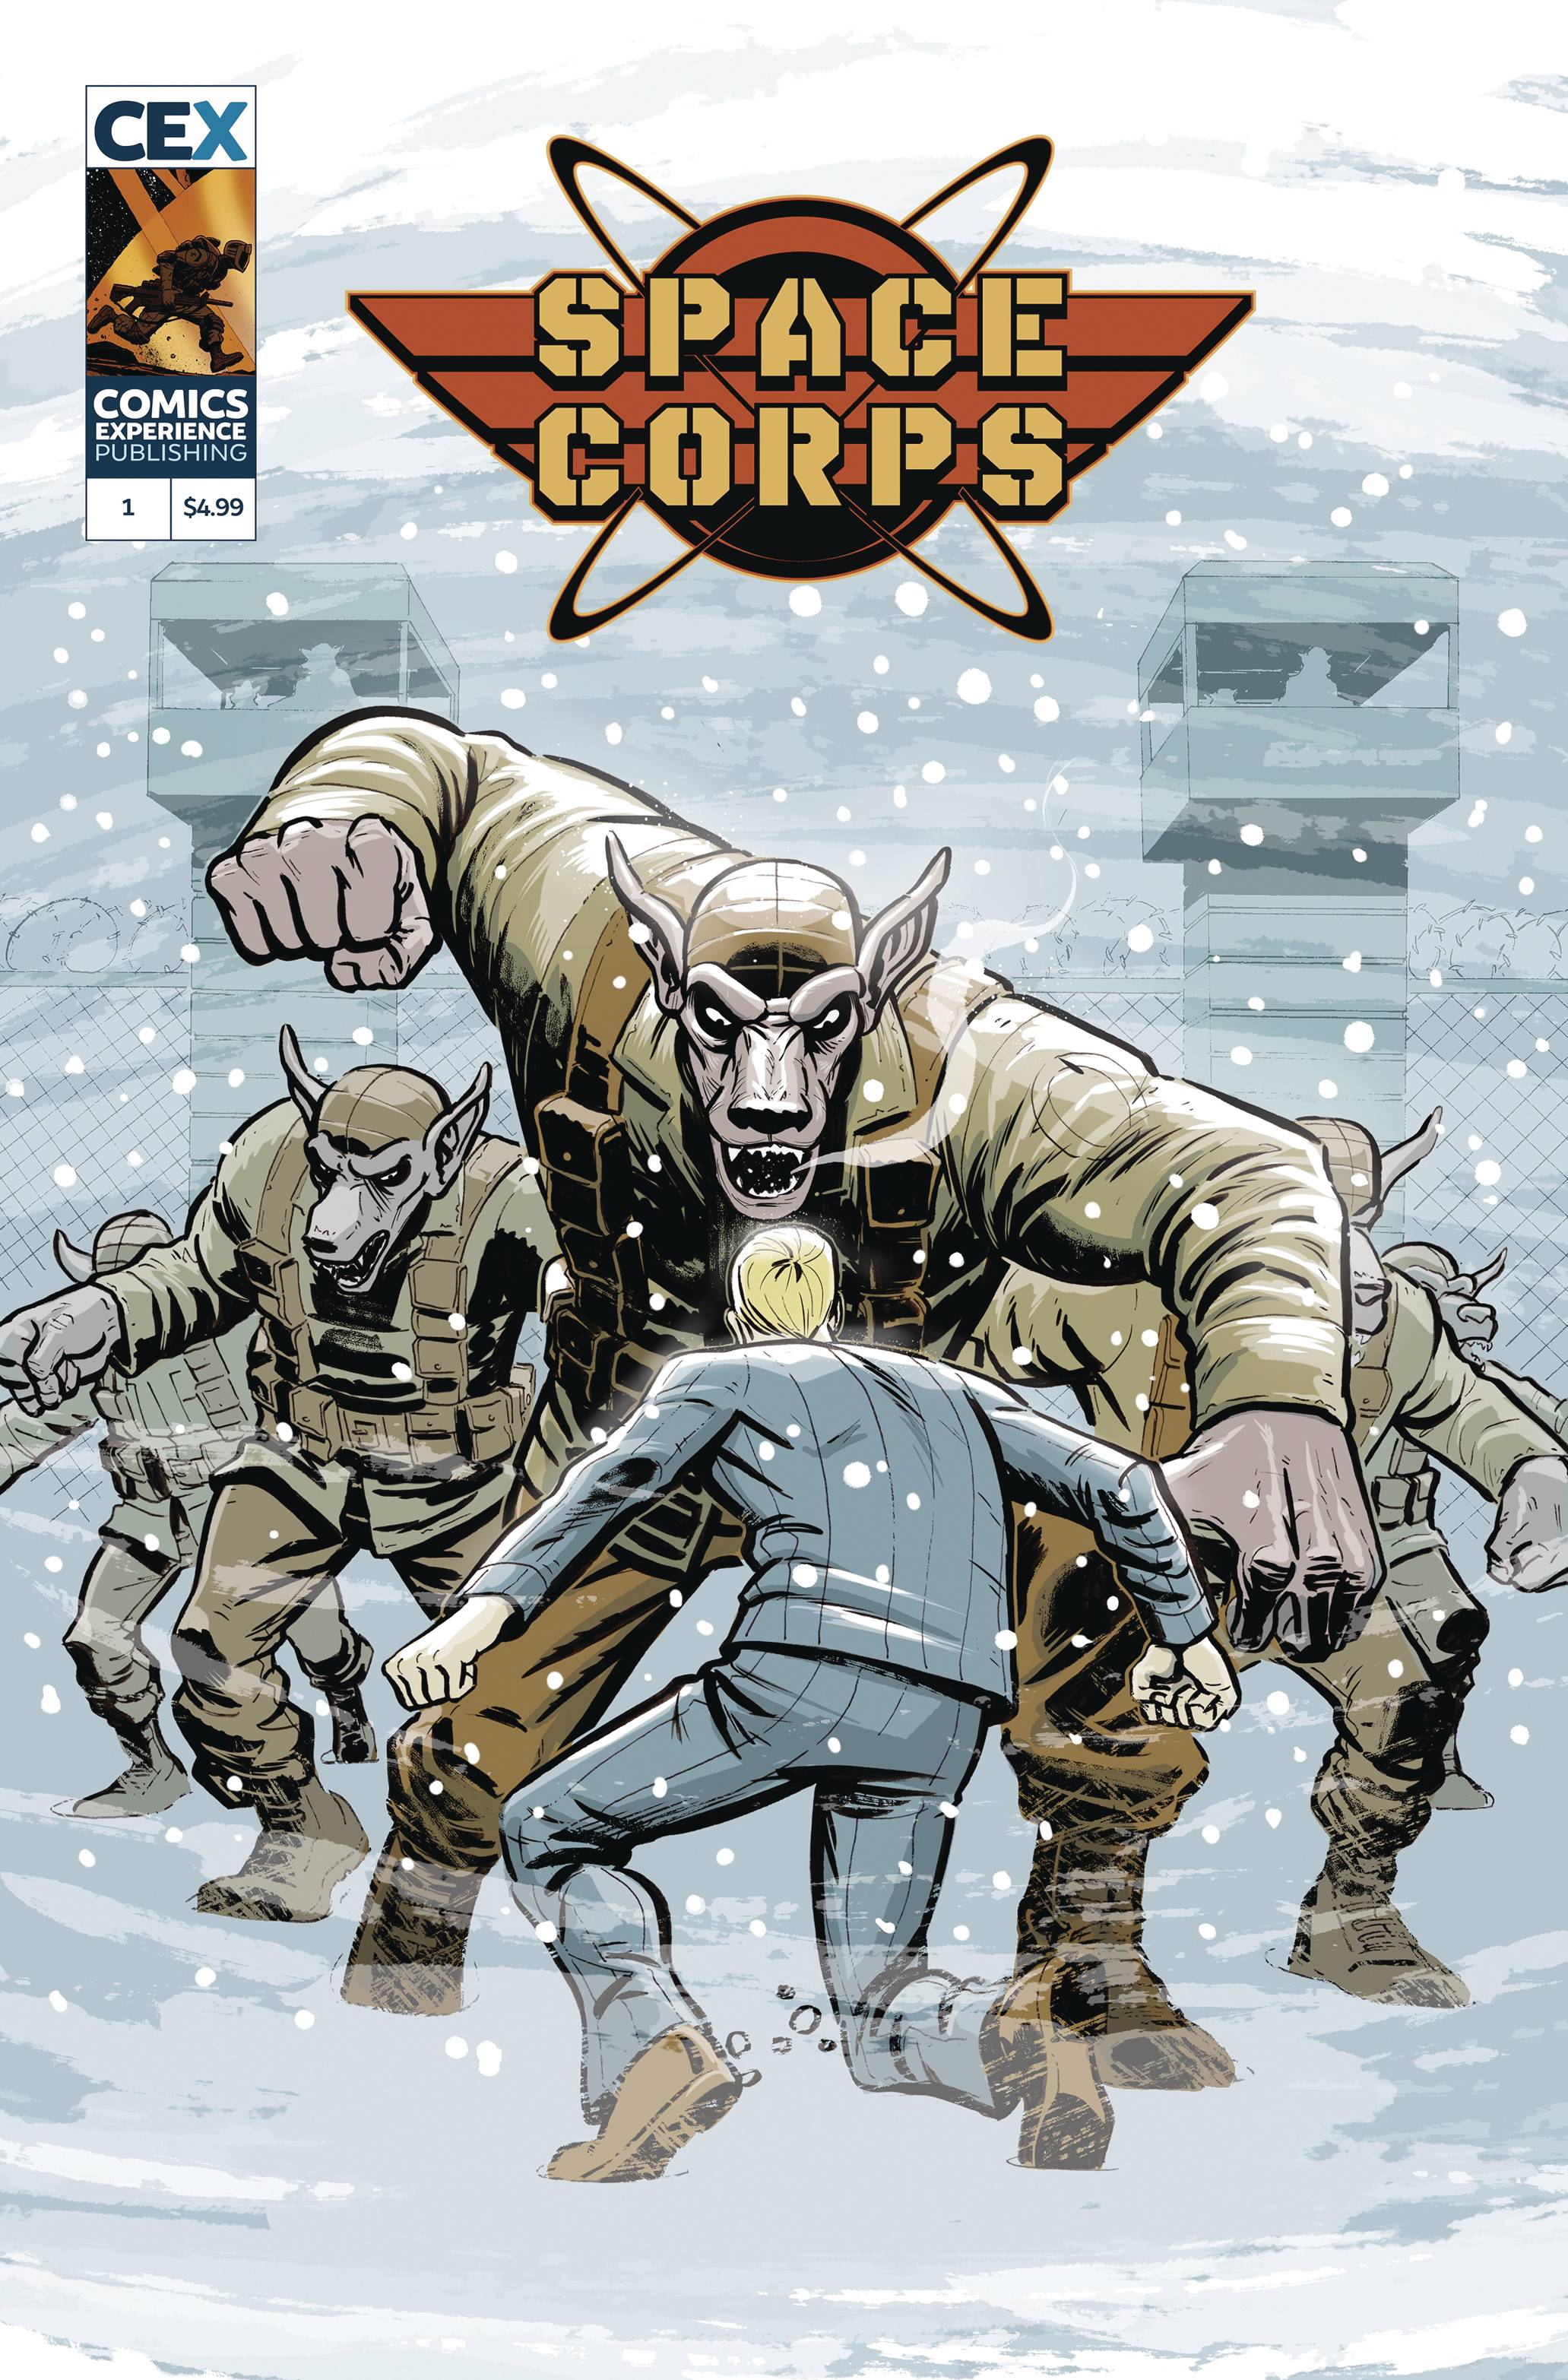 SPACE CORPS #1 (OF 3) CVR A BECK (MR)